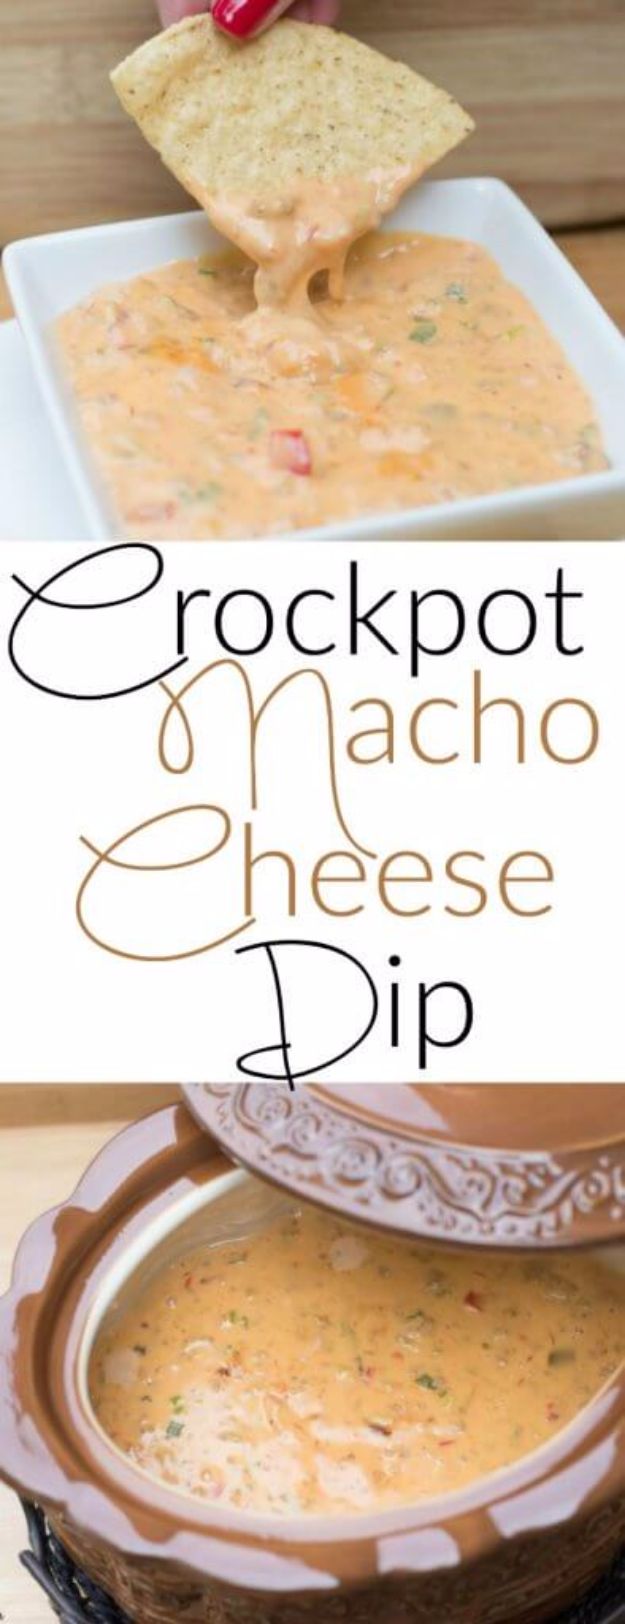 Best Dip Recipes - Crockpot Nacho Cheese Dip - Easy Recipe Ideas for A Party Appetizer - Cold Recipe Ideas for Chips, Crockpot, Mexican Bean Dip, Desserts and Healthy Fruit Options - Italian Dressing and Ranch Dip Recipe Ideas 